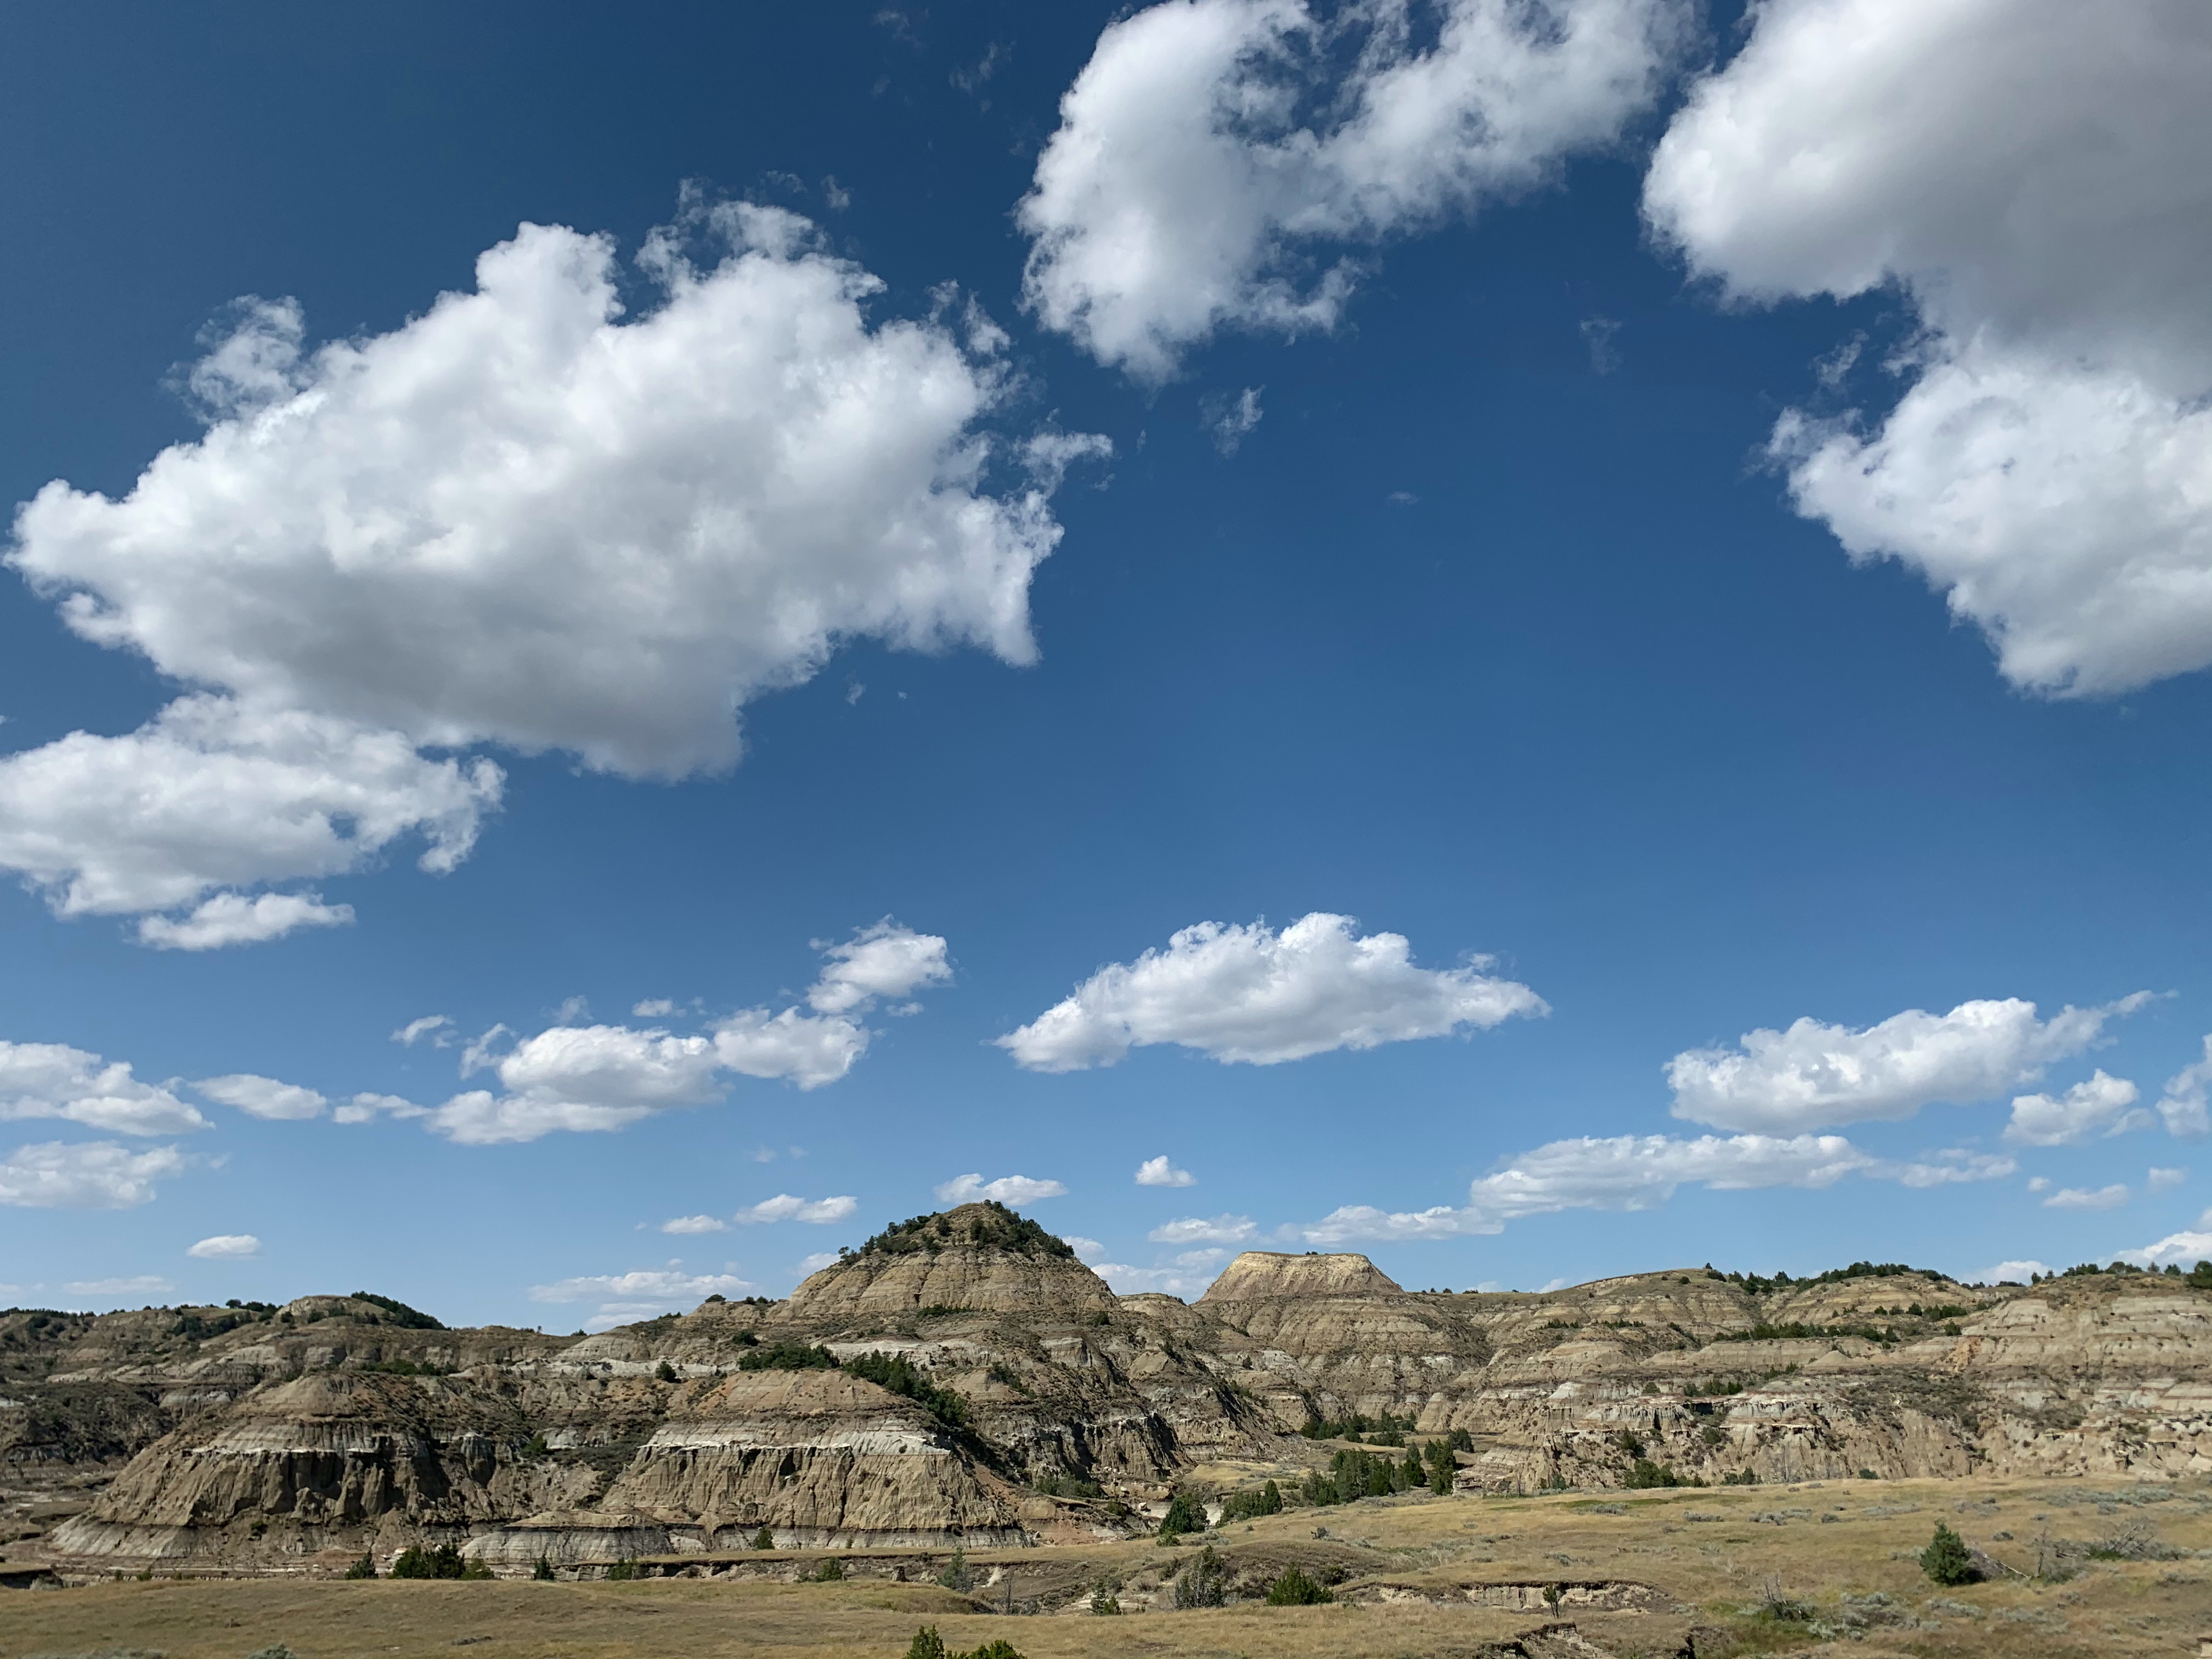 Scenery in Theodore Roosevelt National Park